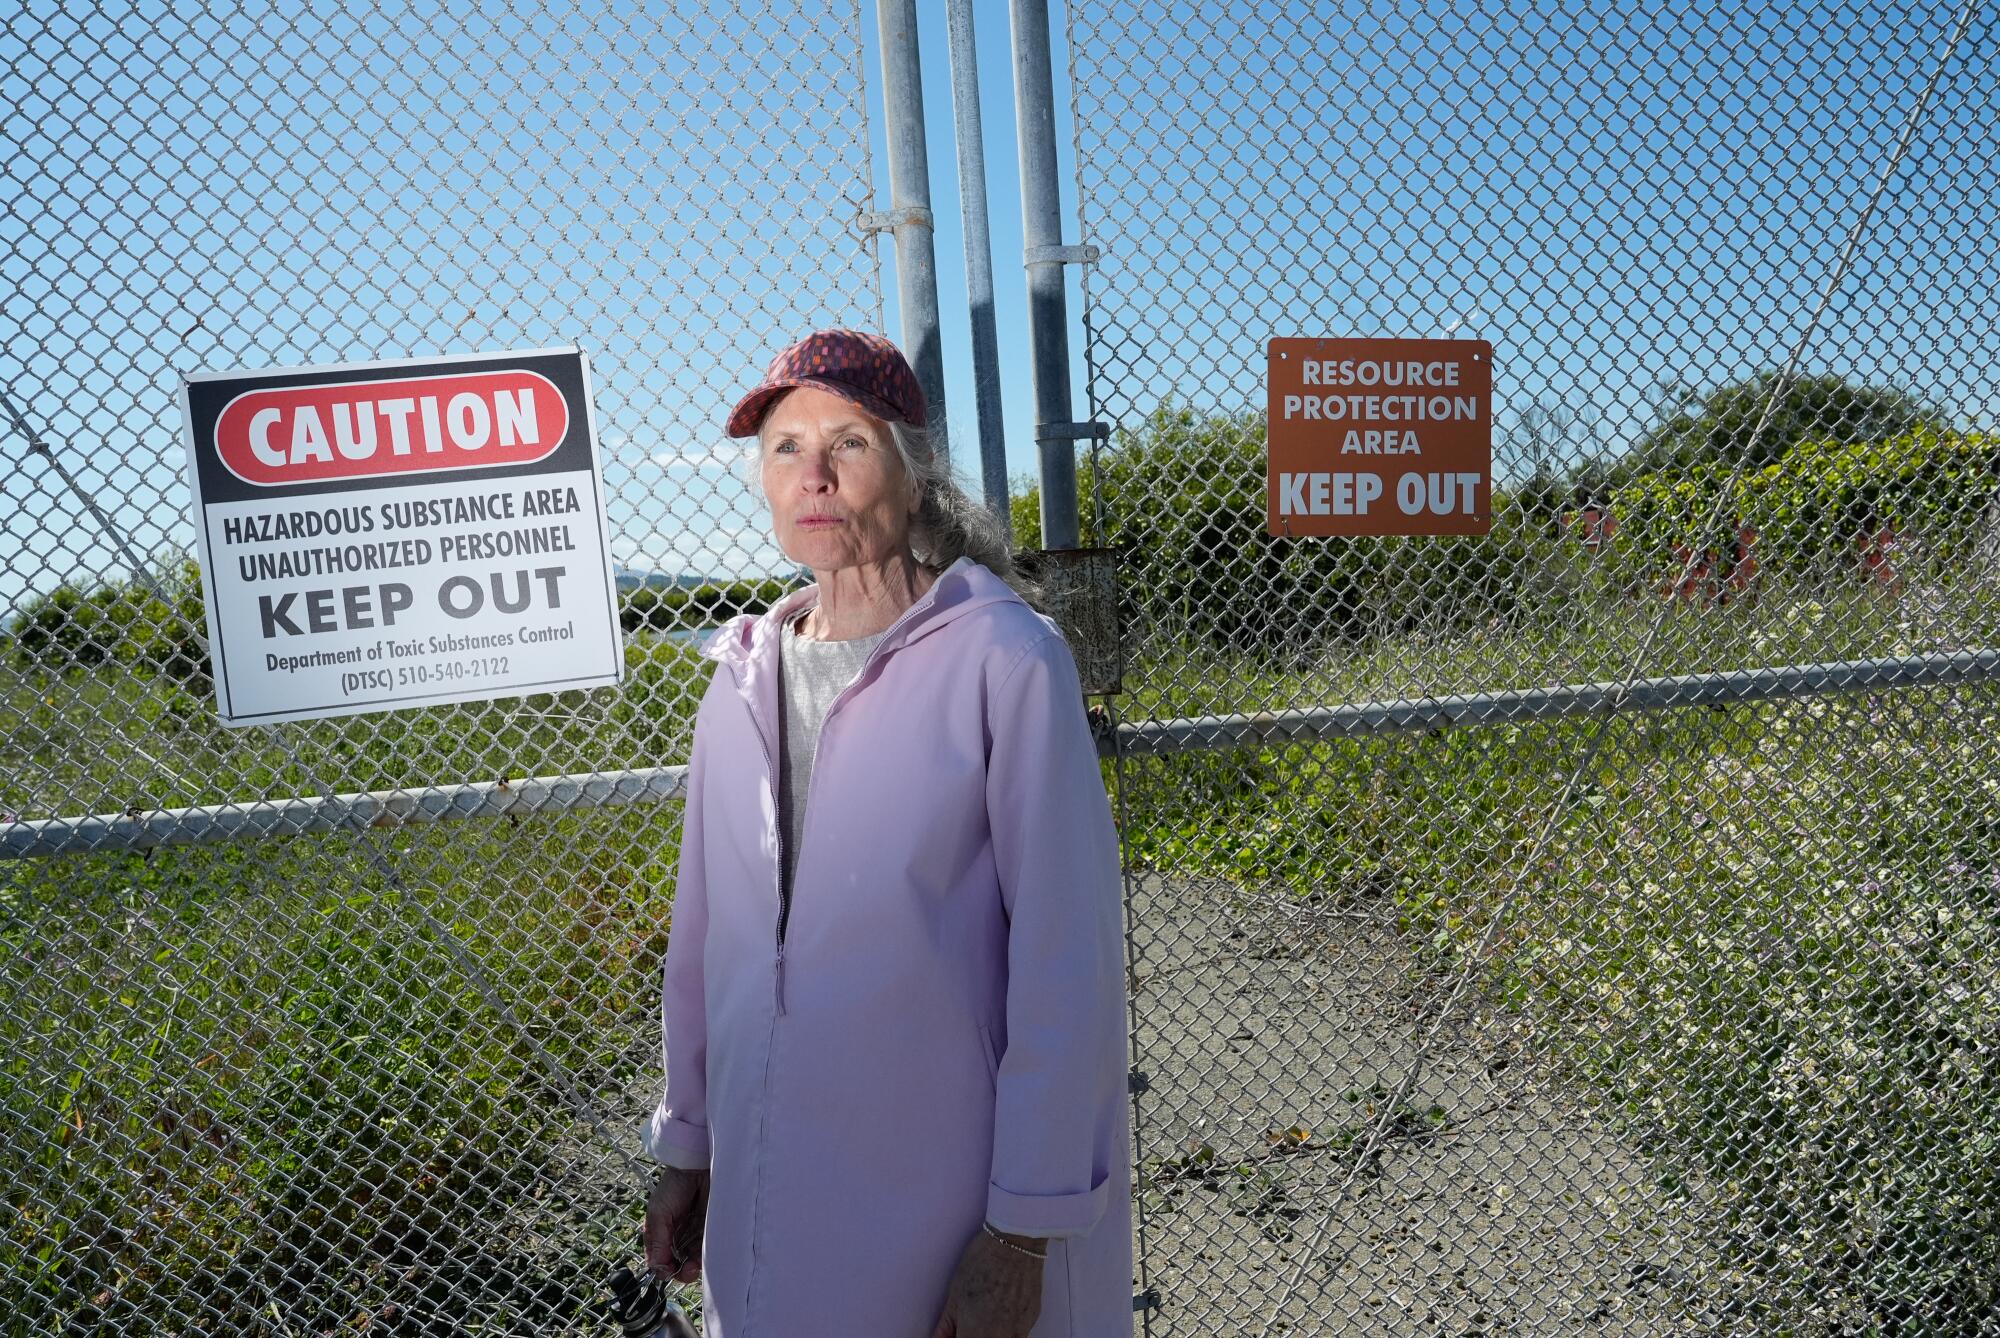 A woman in a purple jacket and a baseball cap stands outside a chain-link fence with "Caution" and "Keep out" signs. 